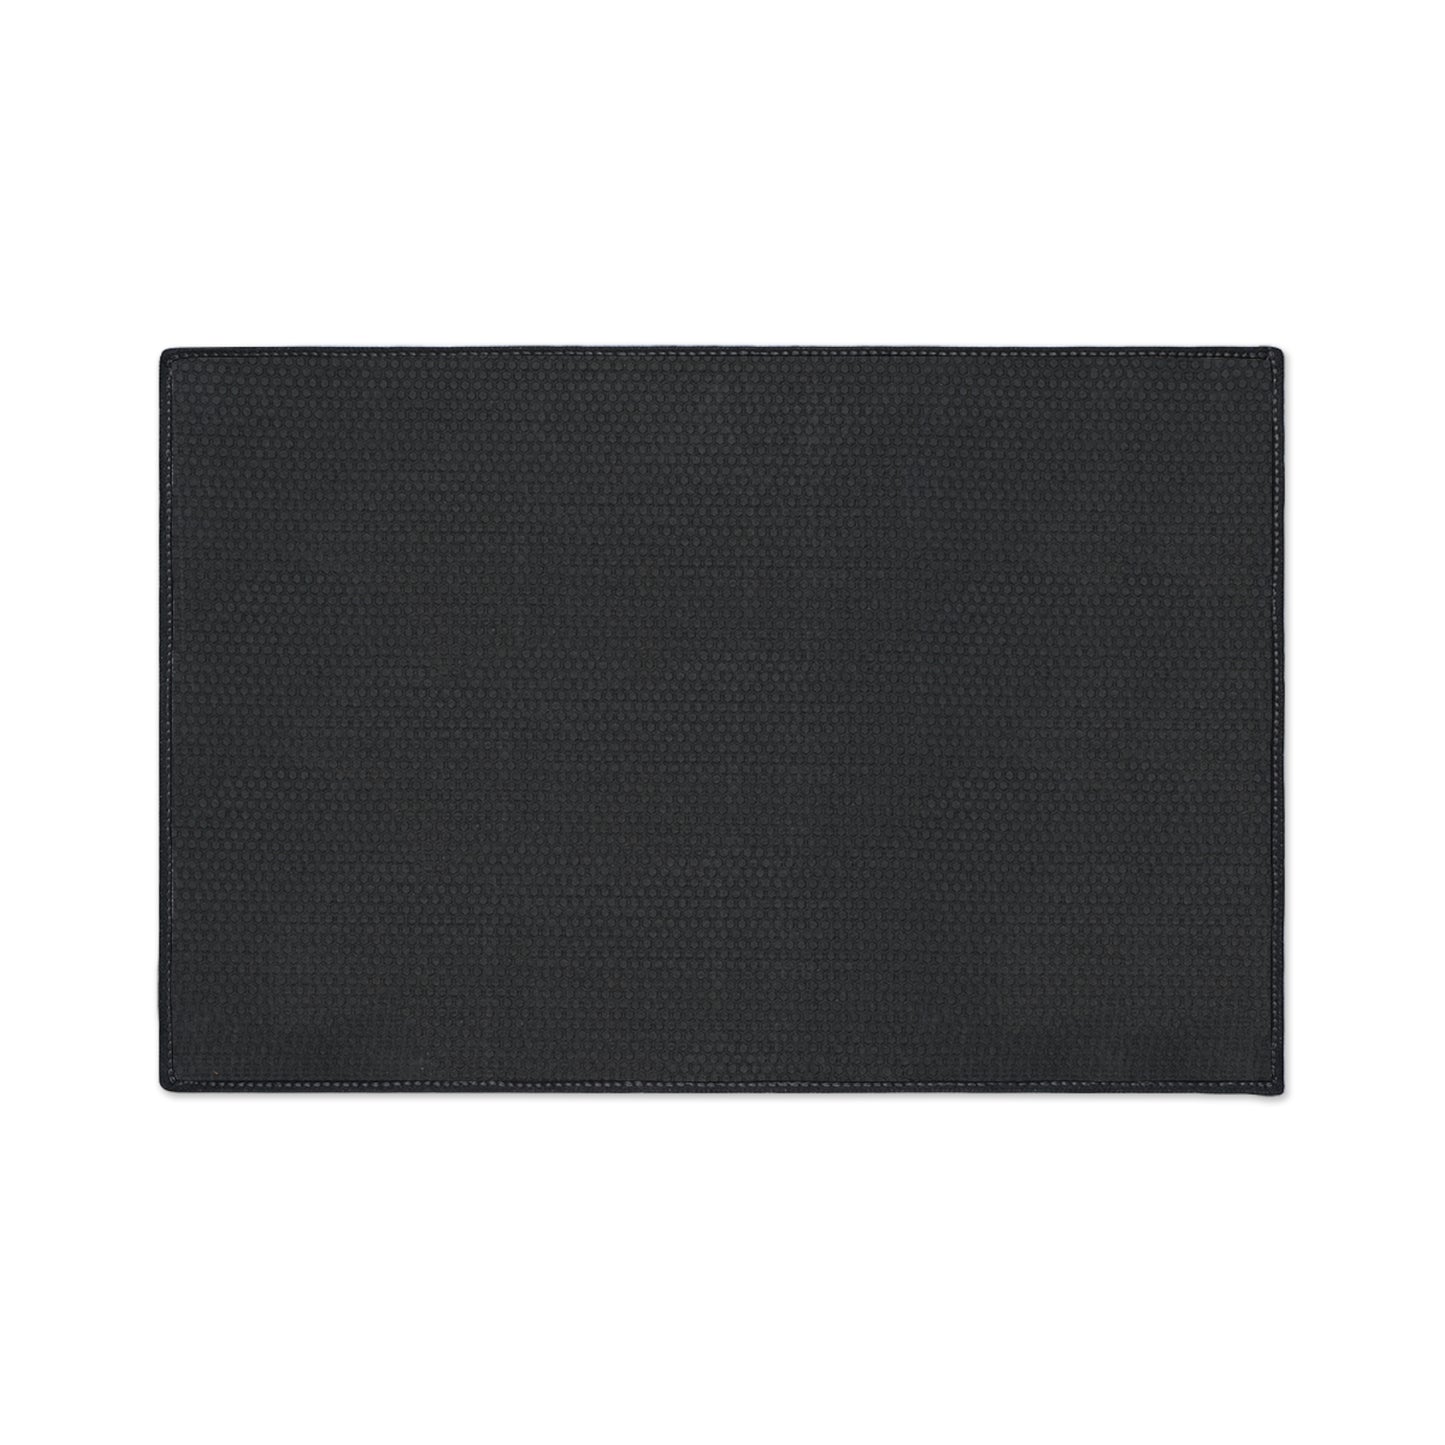 "Merry Christmas" Heavy Duty Floor Mat with Non-Slip Backing